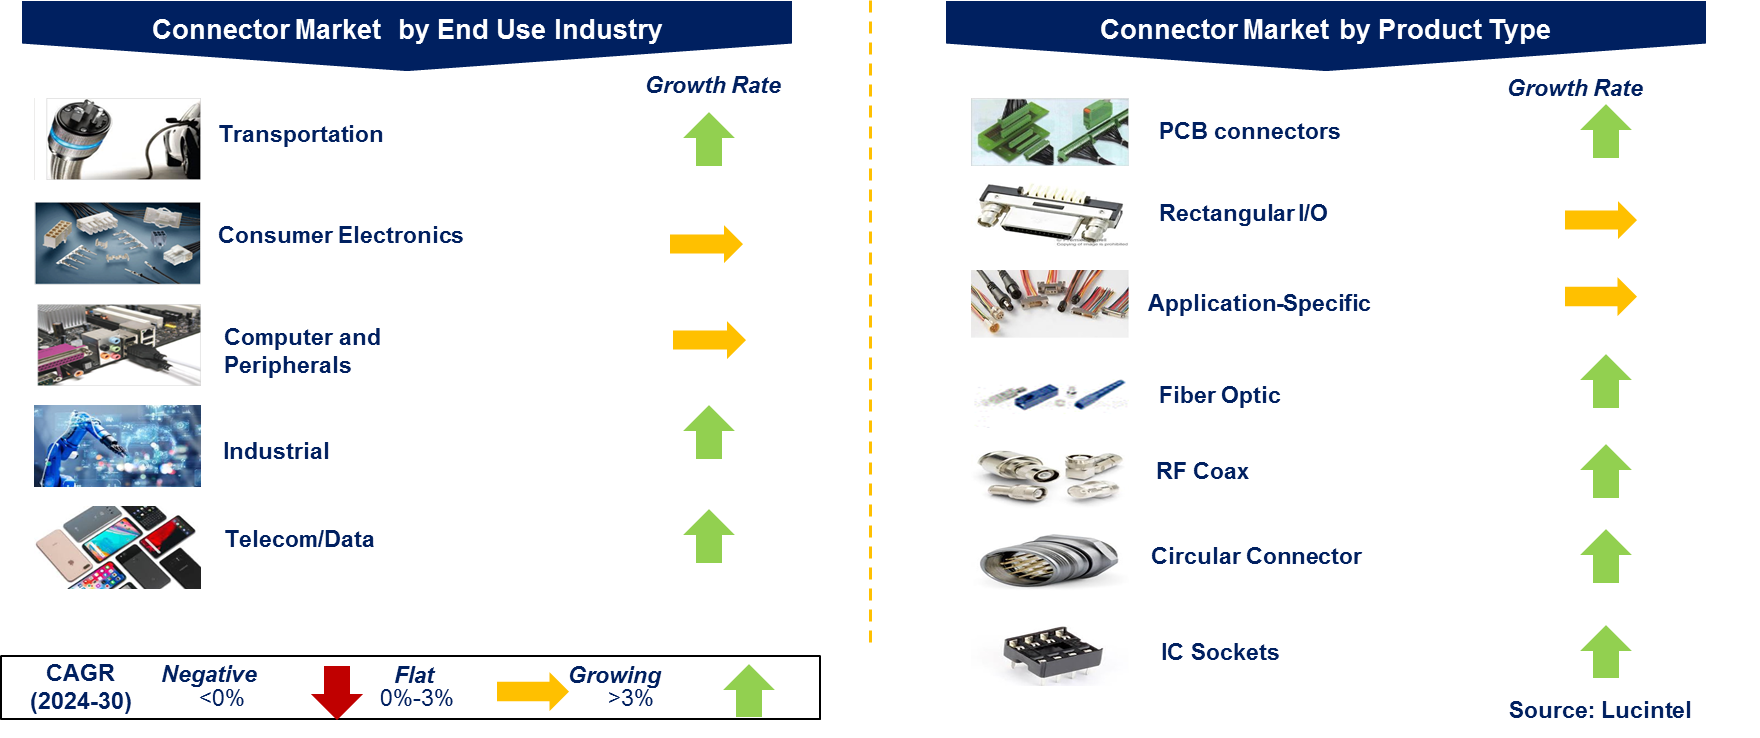 Connector Market by Segments